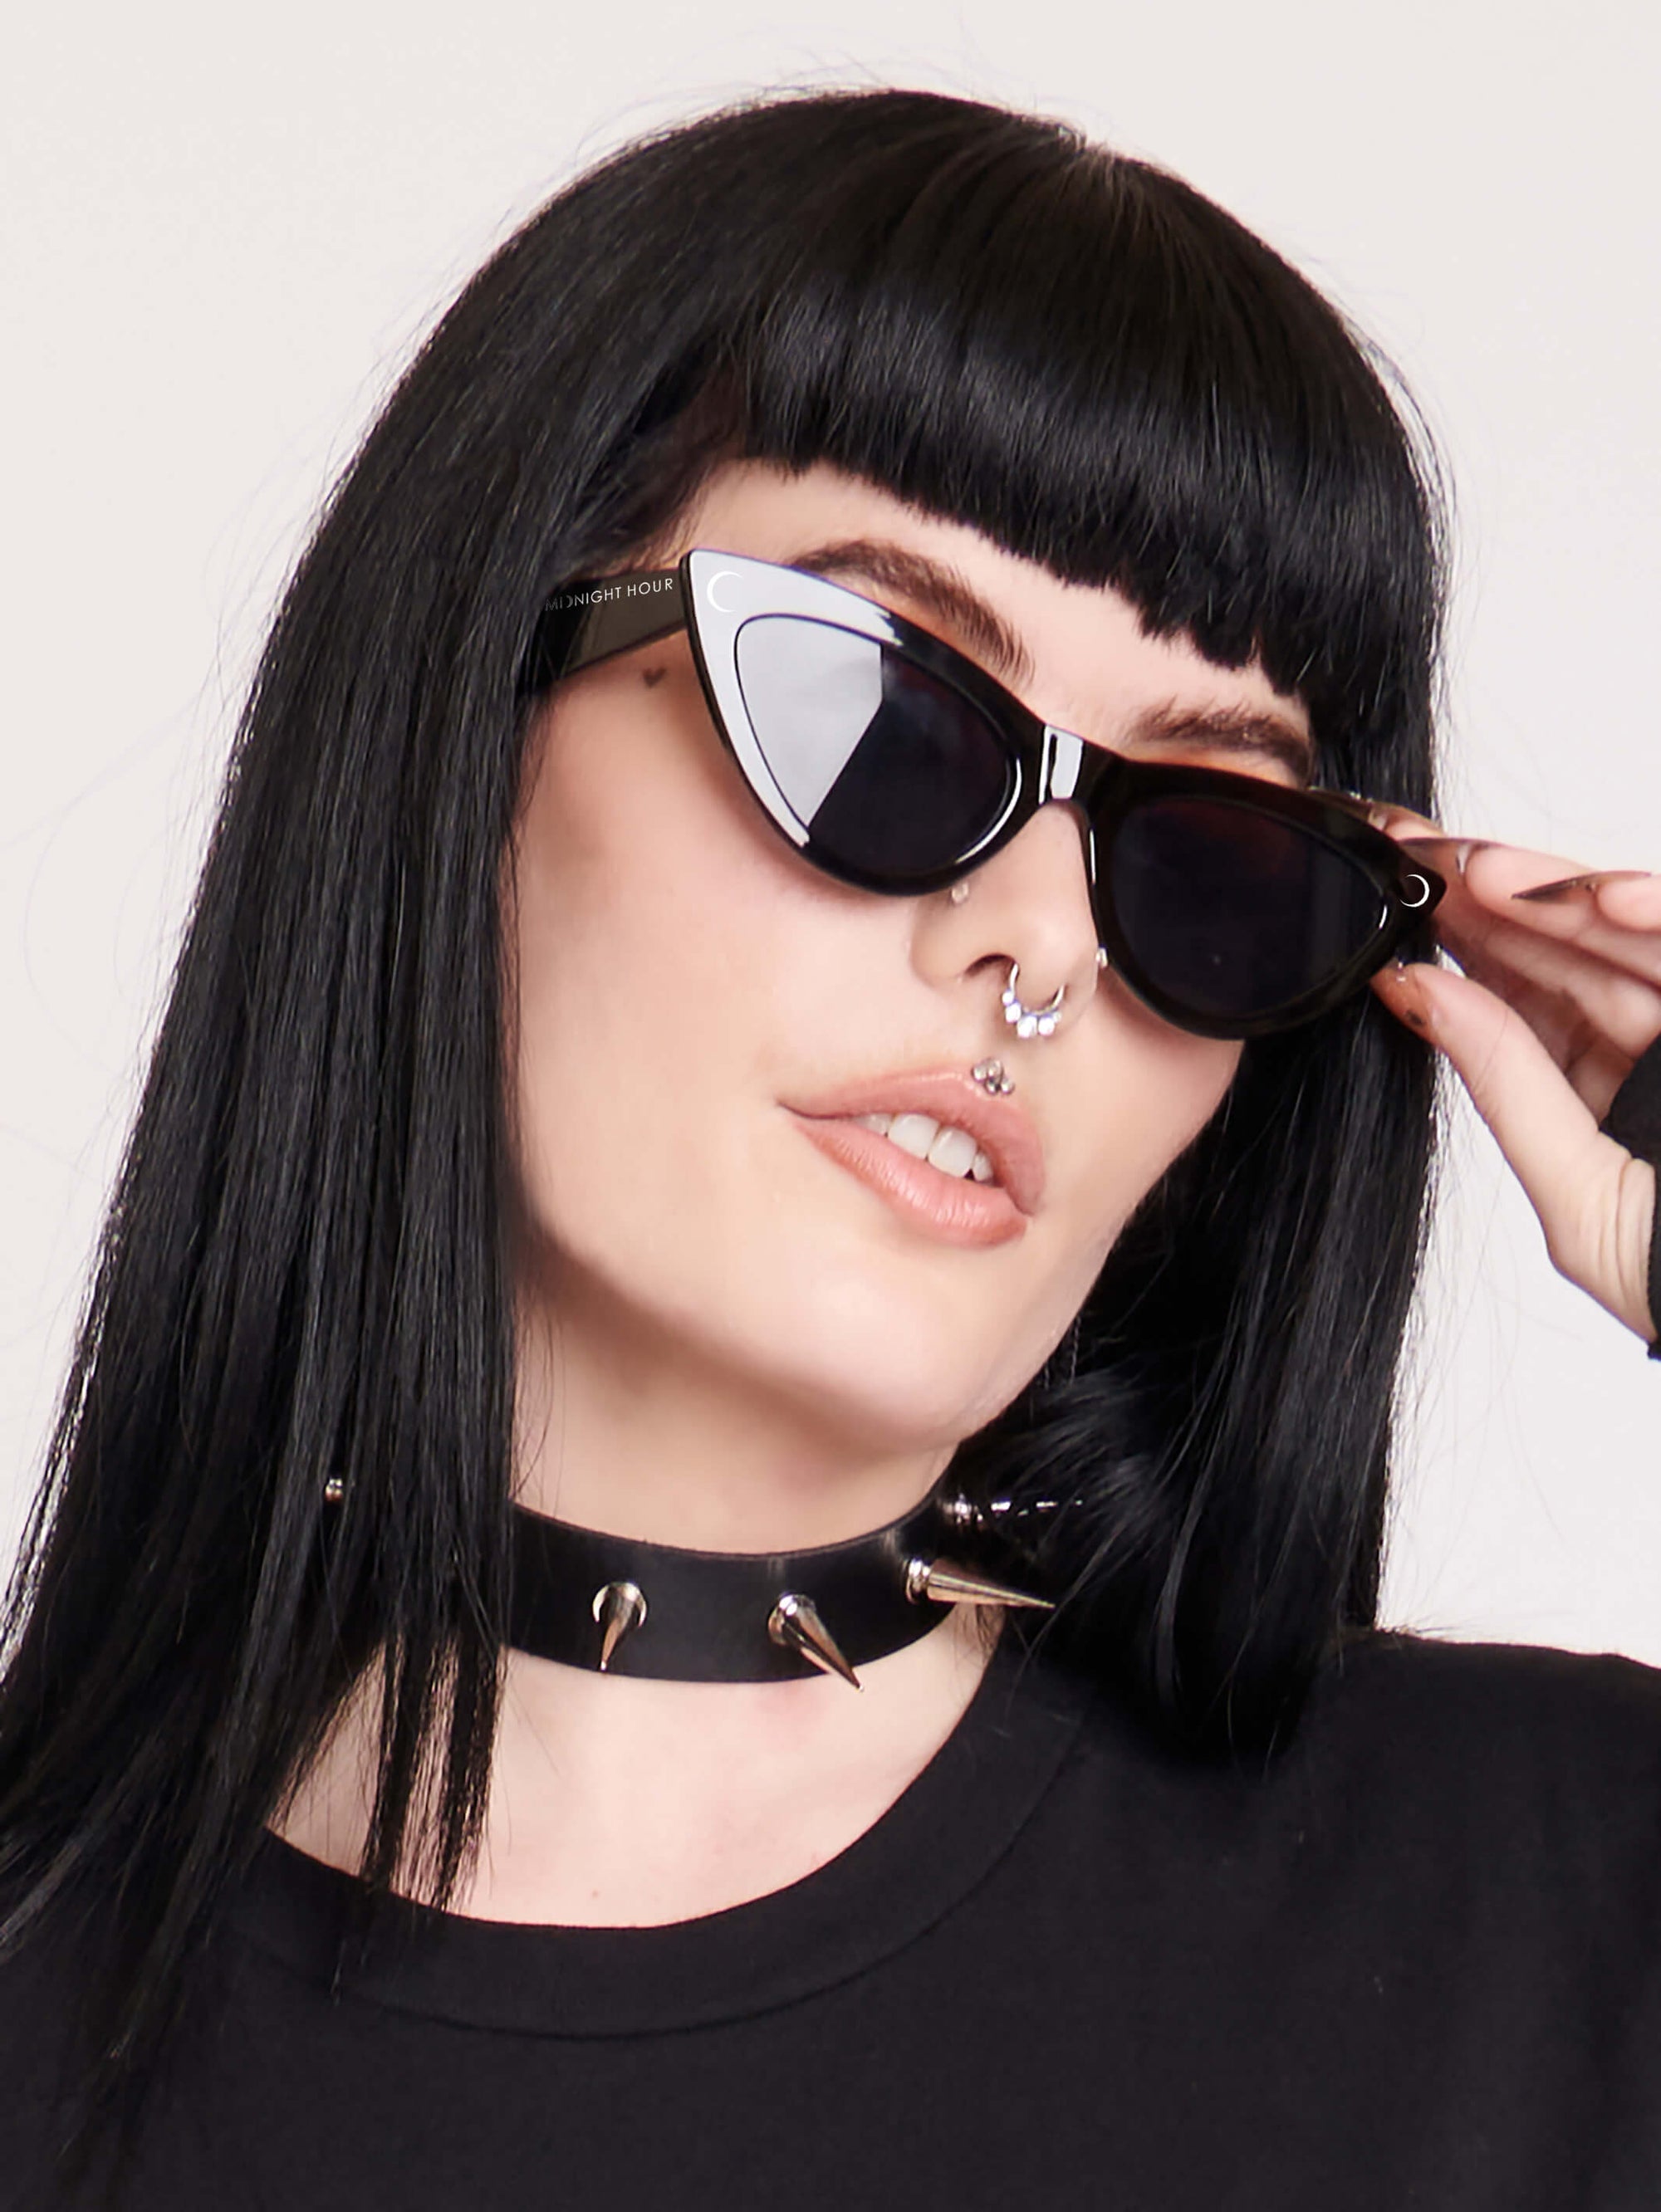 Perfectly sized cat-eye black frames with our signature Crescent Moon on the front right corner and Midnight Hour logo